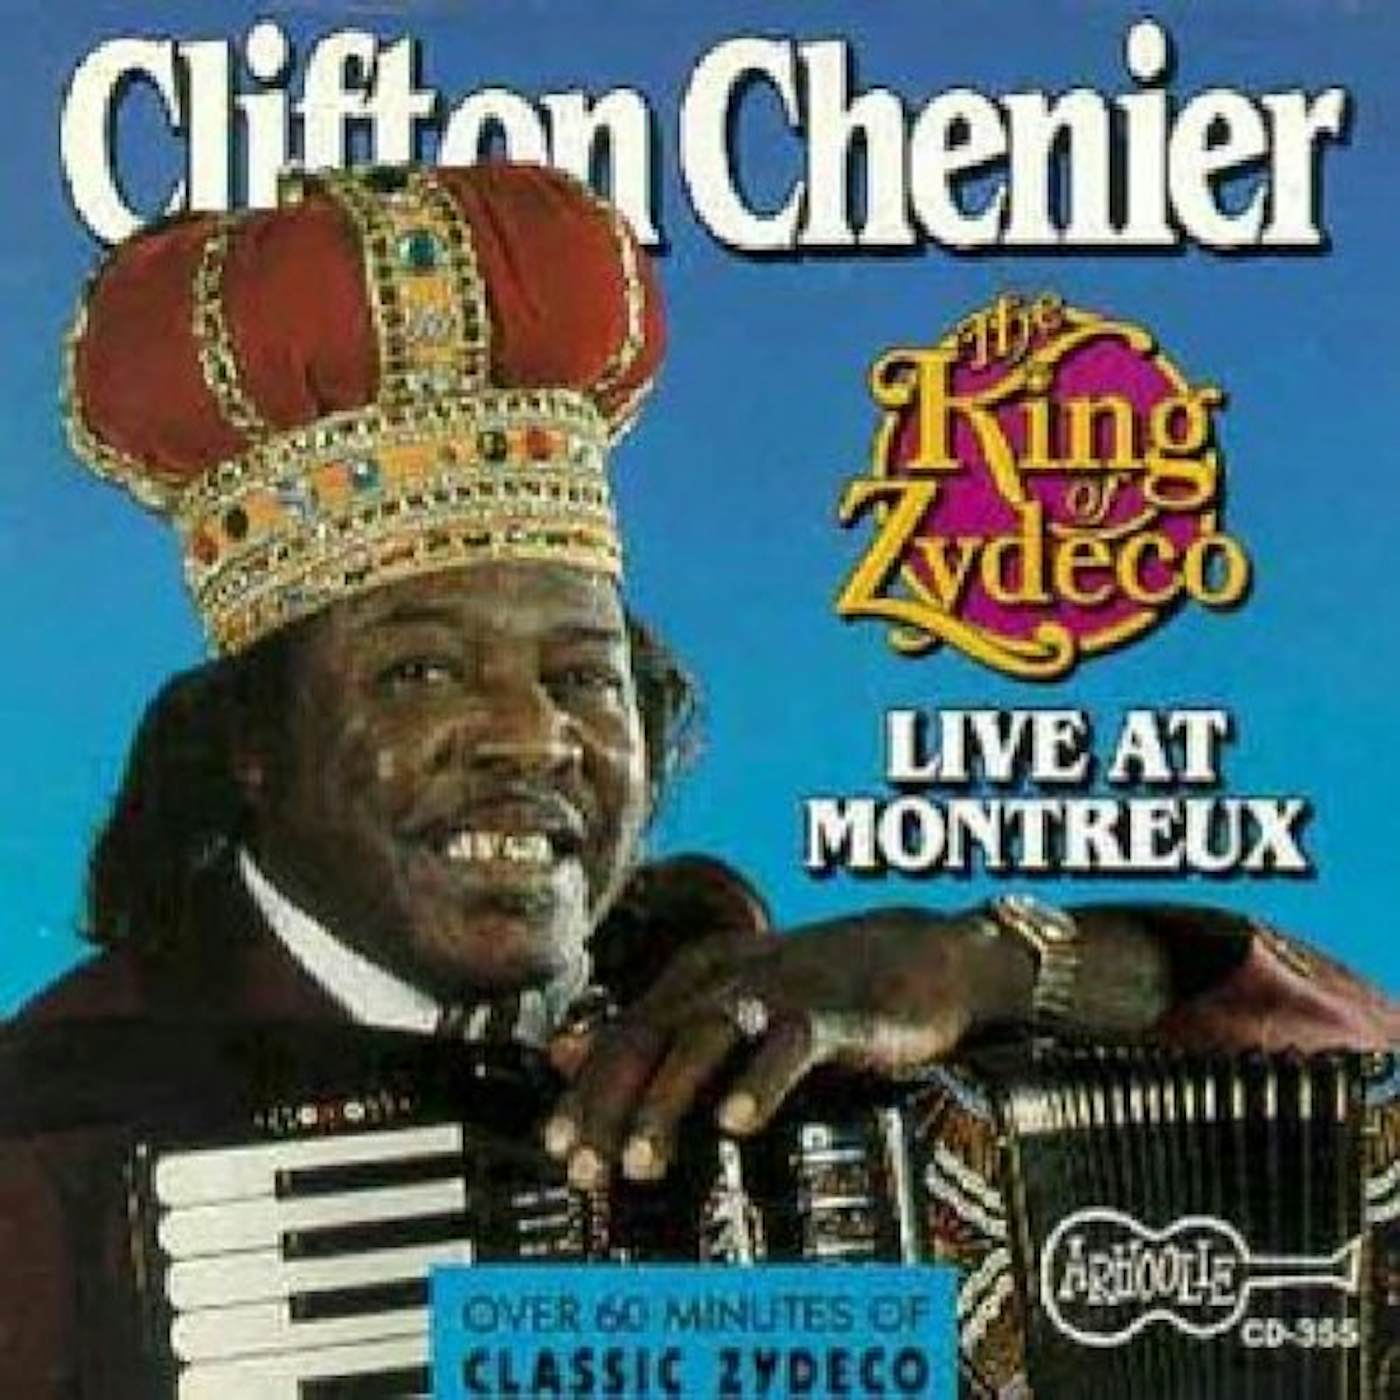 Clifton Chenier THE KING OF ZYDECO LIVE AT MONTREUX CD